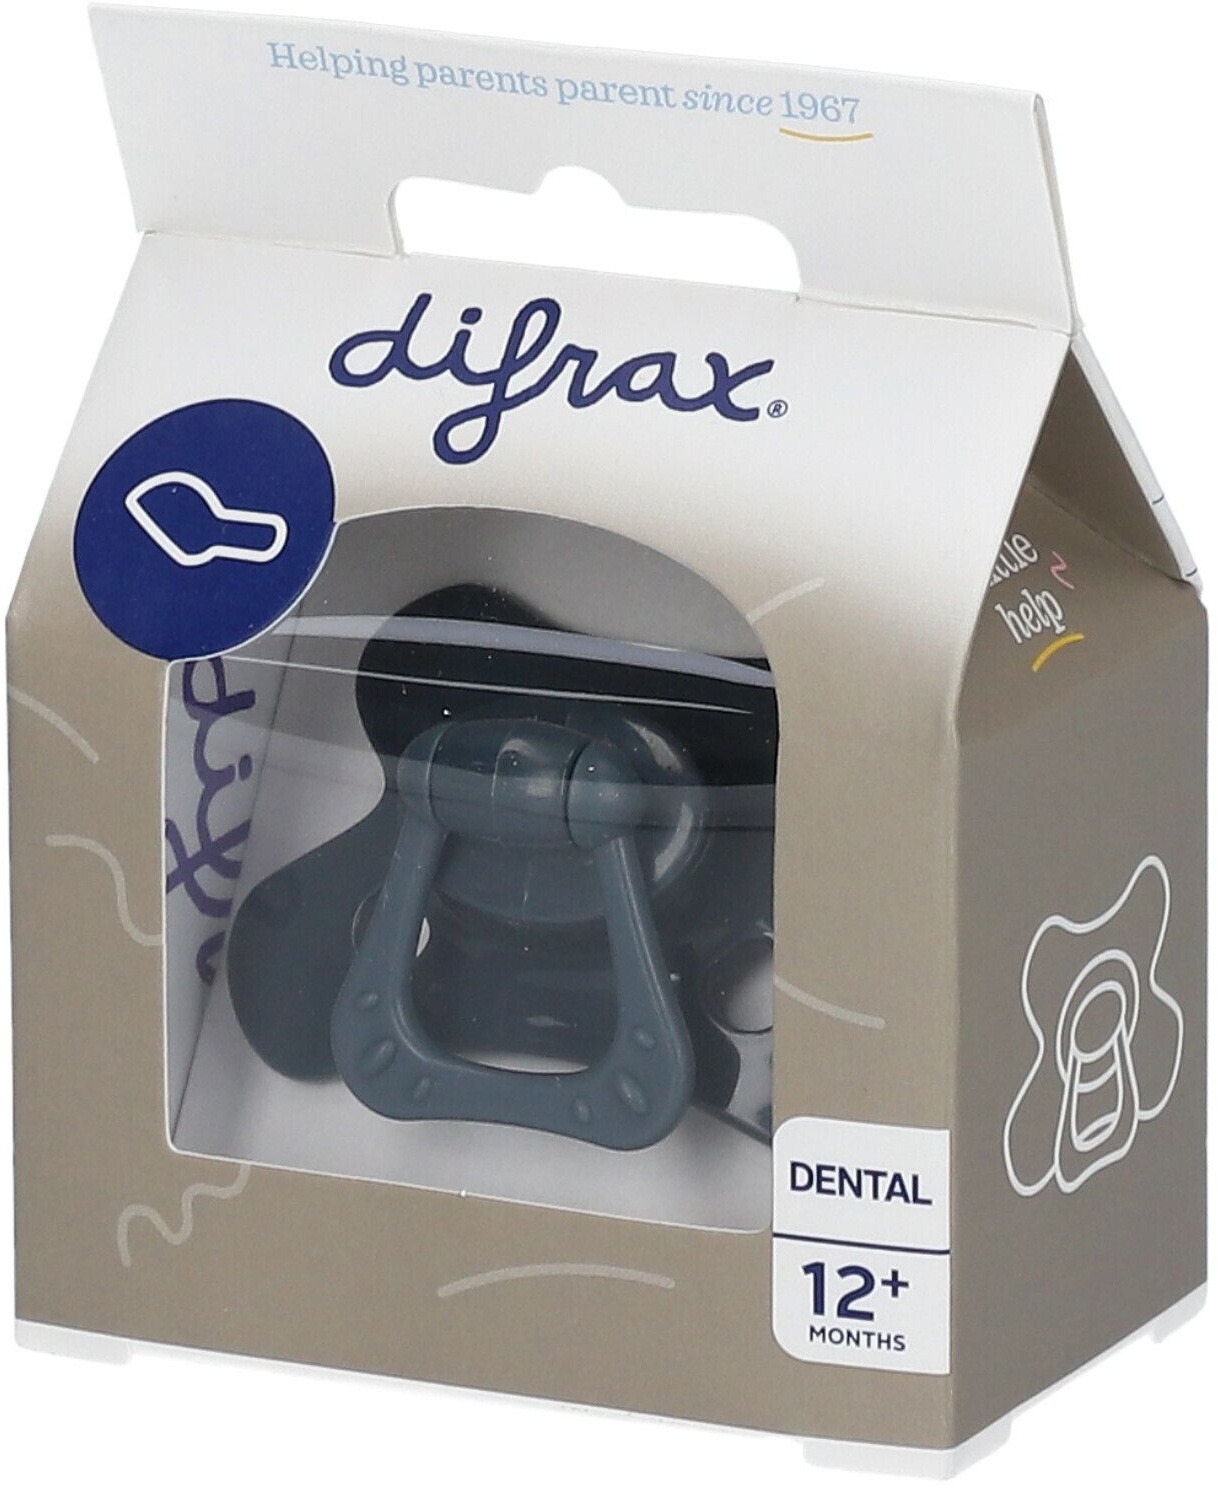 difrax Sucette - Dental - 12+ Mois - Girafe 1 pc(s) Sucette(s)